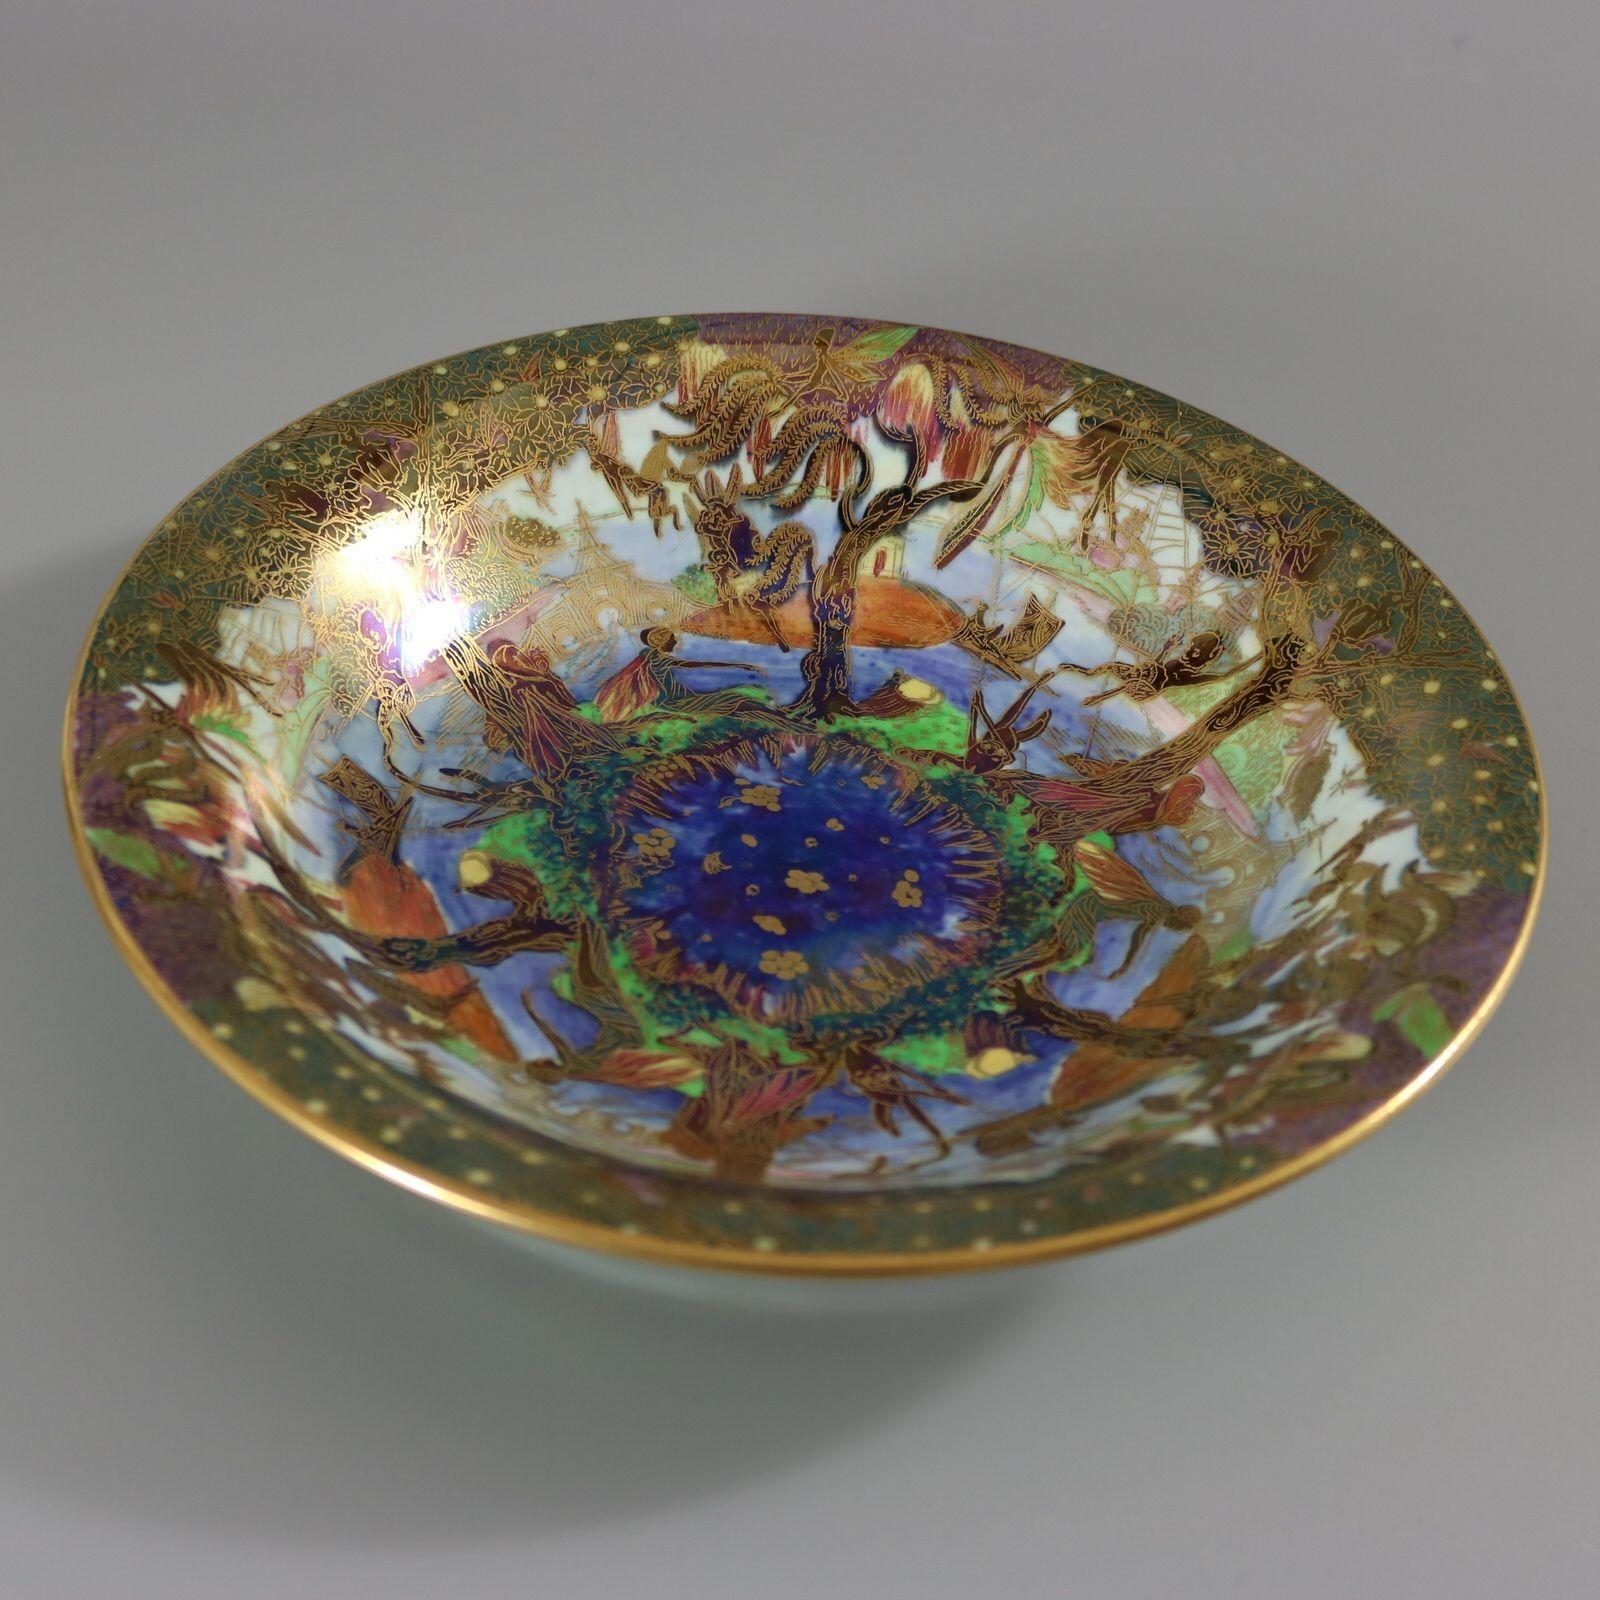 Wedgwood Fairyland Lustre Lily Tray, shape number 2483. Decorated with 'Jumping Faun' pattern to interior, 'Flight of Birds' to exterior. 'Pebble and Grass' border to exterior rim and foot rim. The 'Jumping Faun' pattern features a river scene,